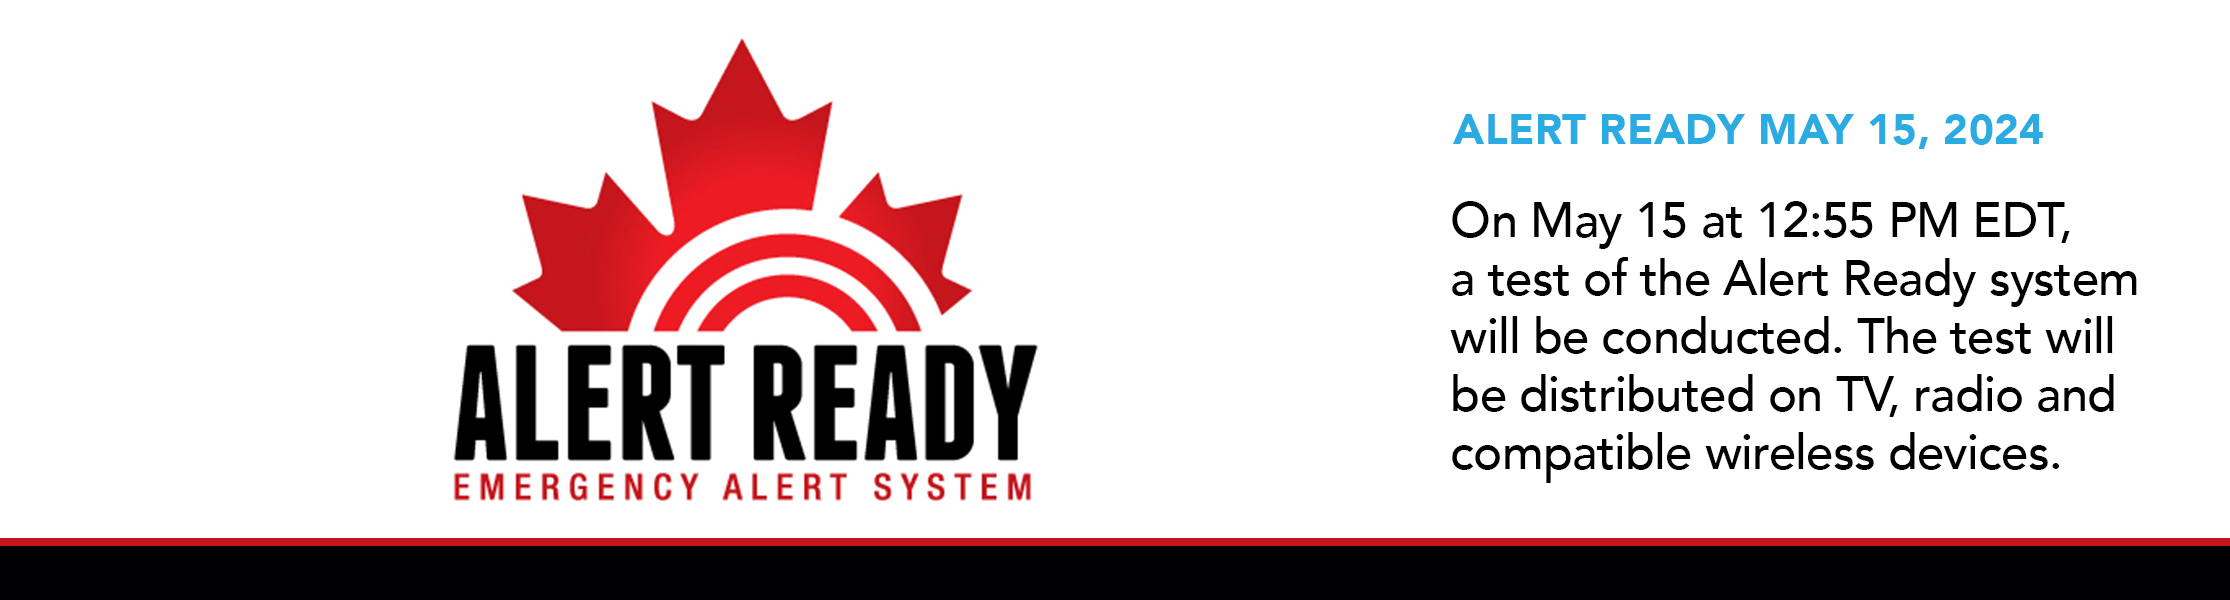 Alert Ready - Wednesday May 15 at 12:55pm